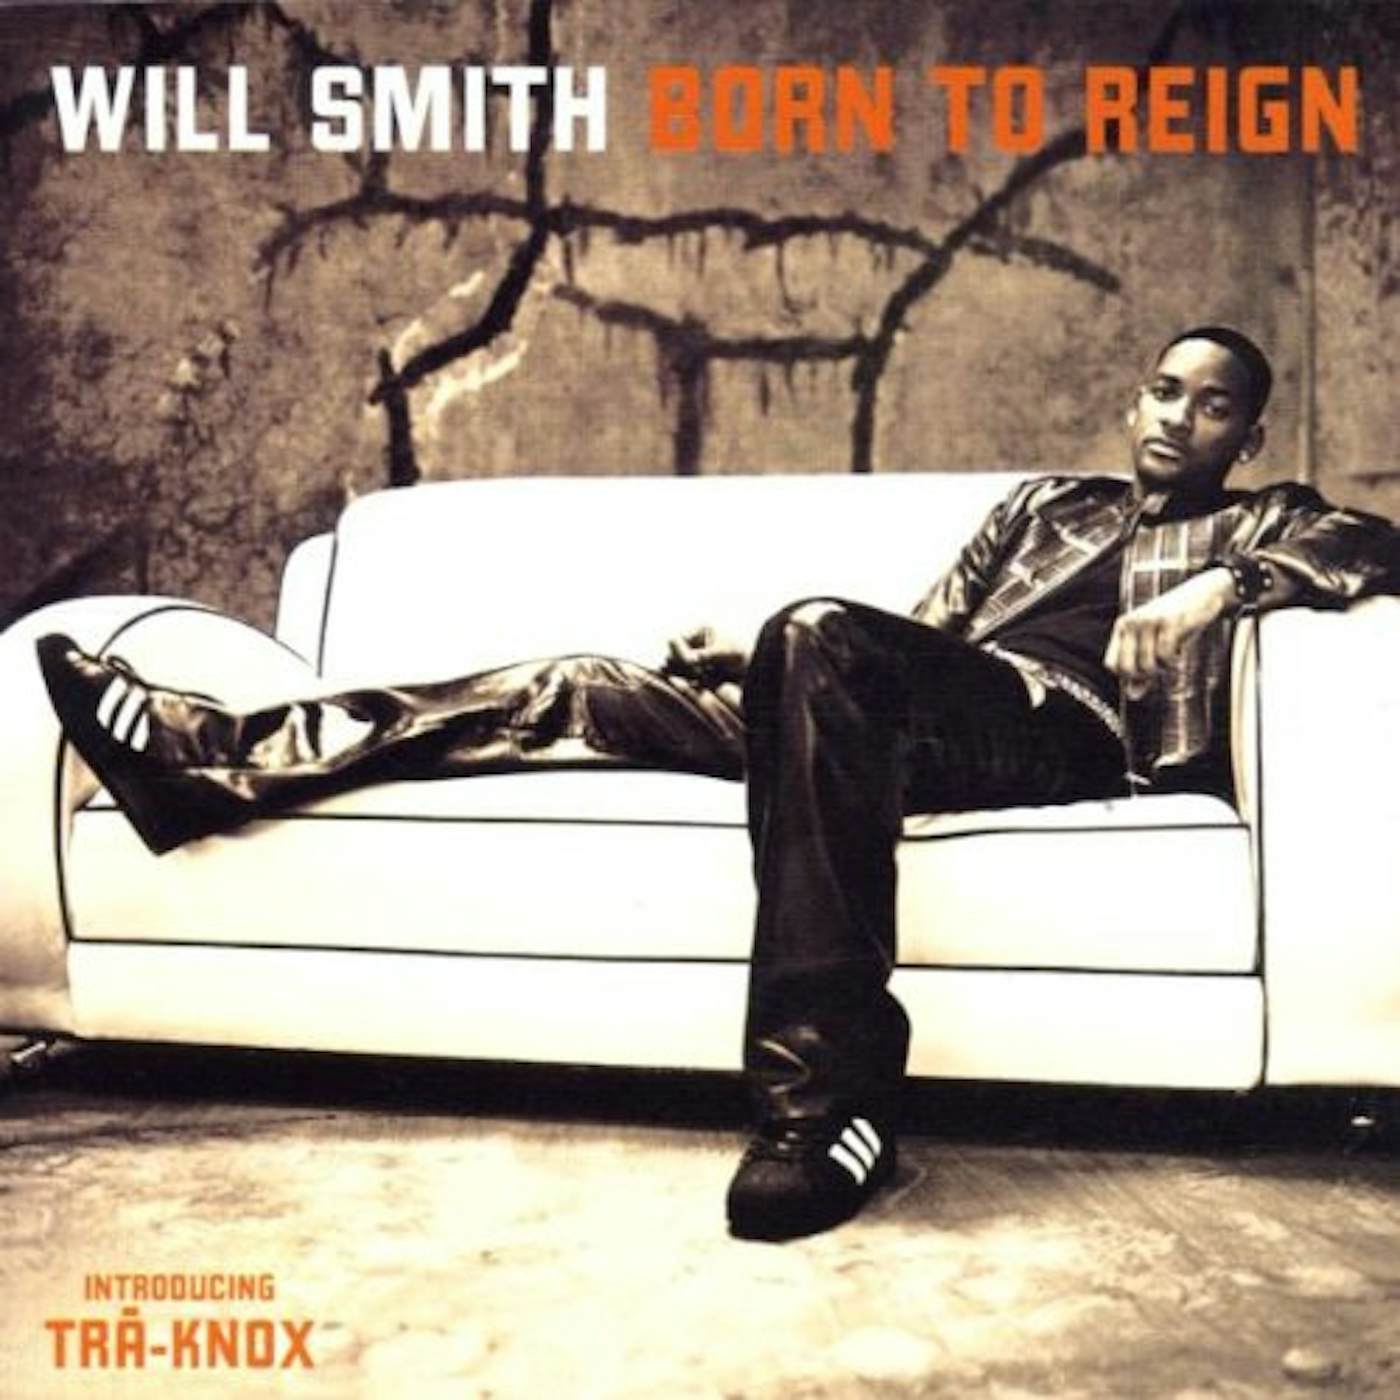 Will Smith BORN TO REIGN CD